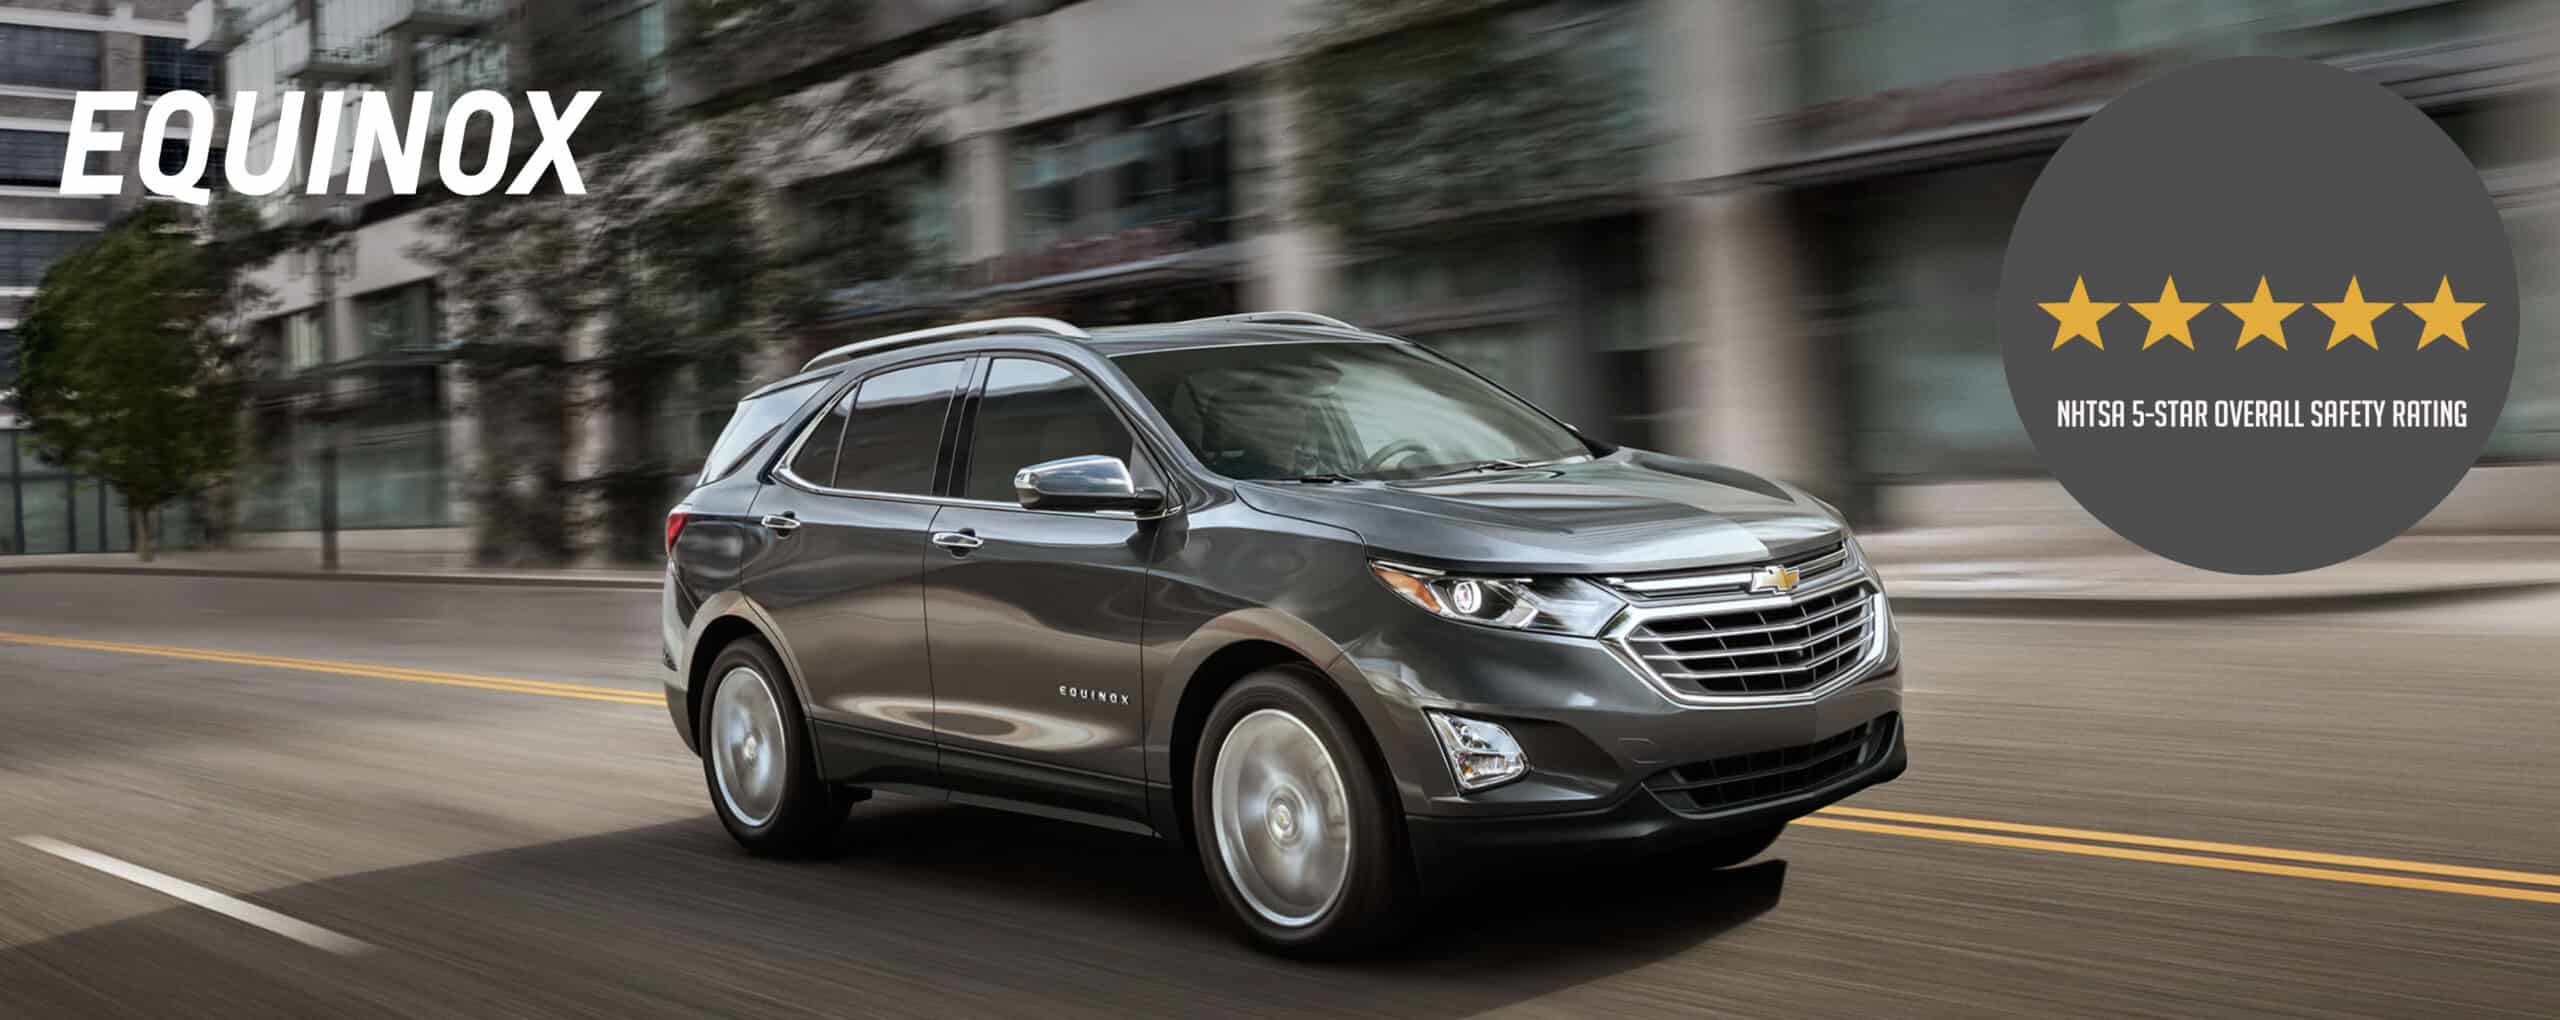 Chevrolet Equinox rated five stars